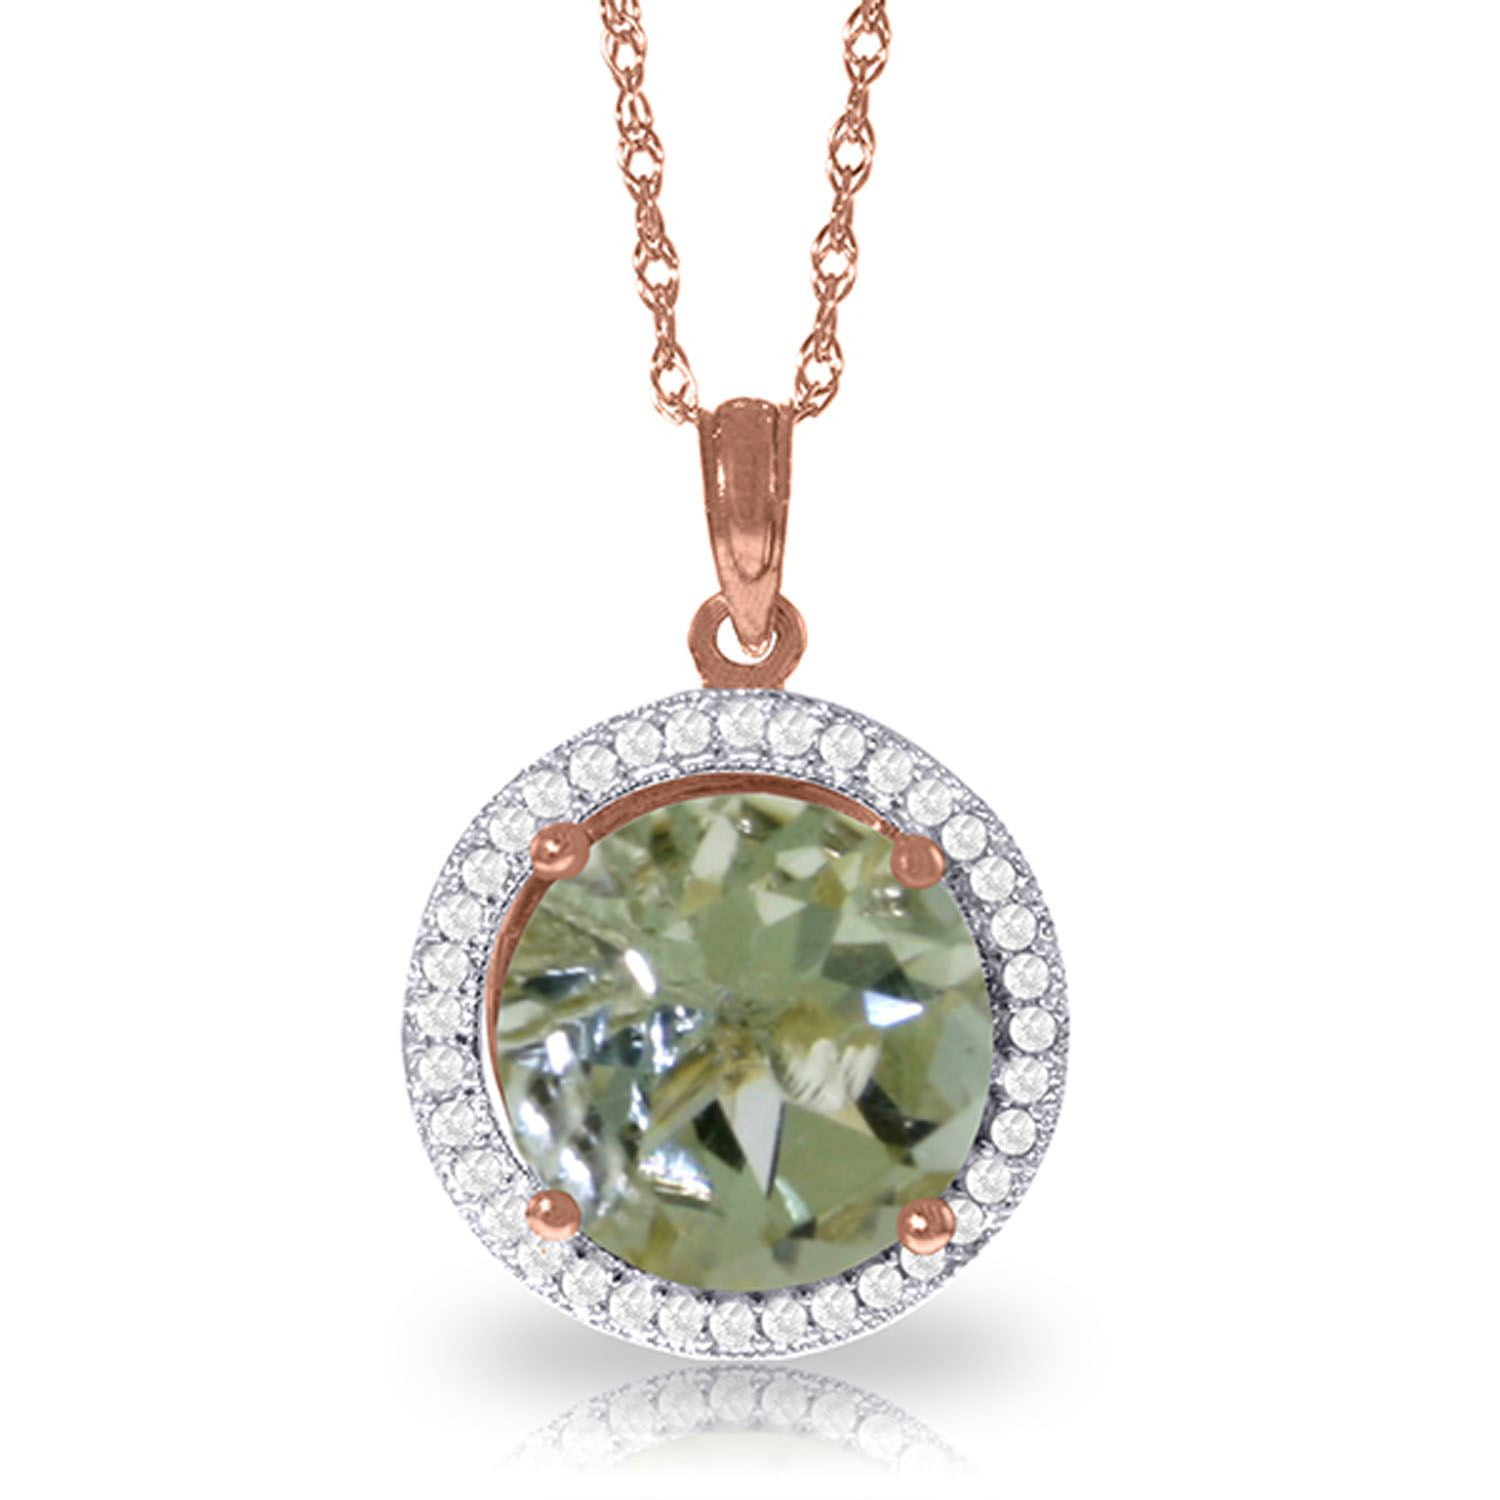 ALARRI 7 Carat 14K Solid Gold Engage Green Amethyst Necklace with 24 Inch Chain Length